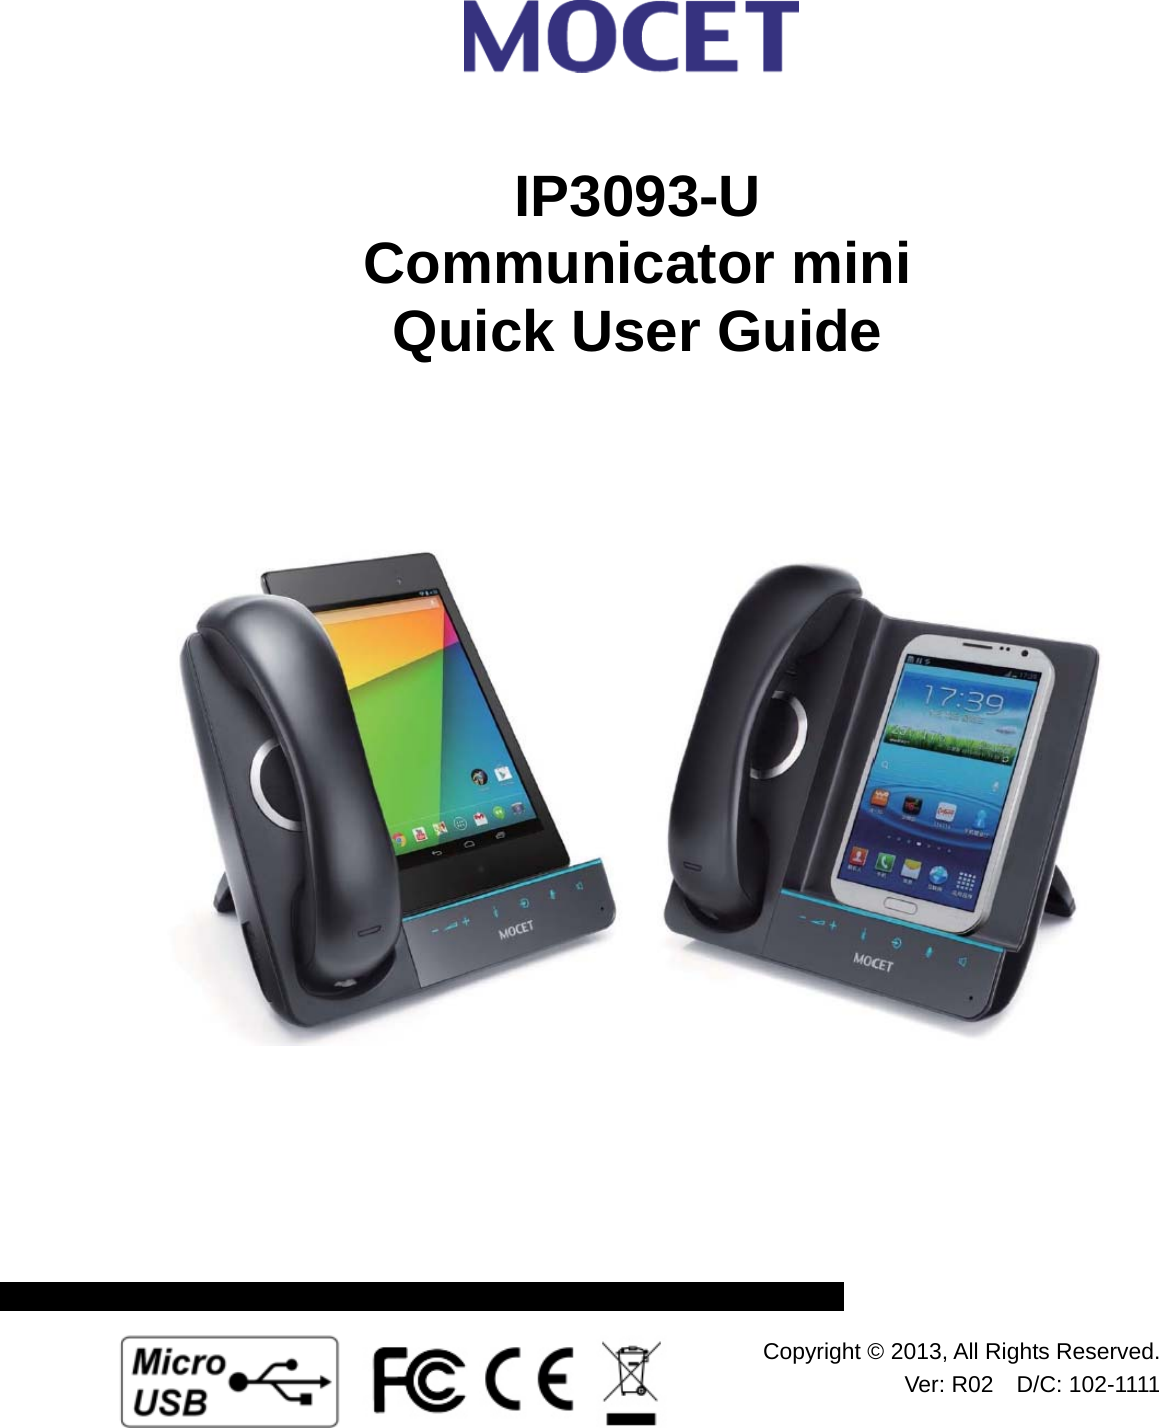                        IP3093-U  Communicator mini Quick User Guide Copyright © 2013, All Rights Reserved.Ver: R02  D/C: 102-1111